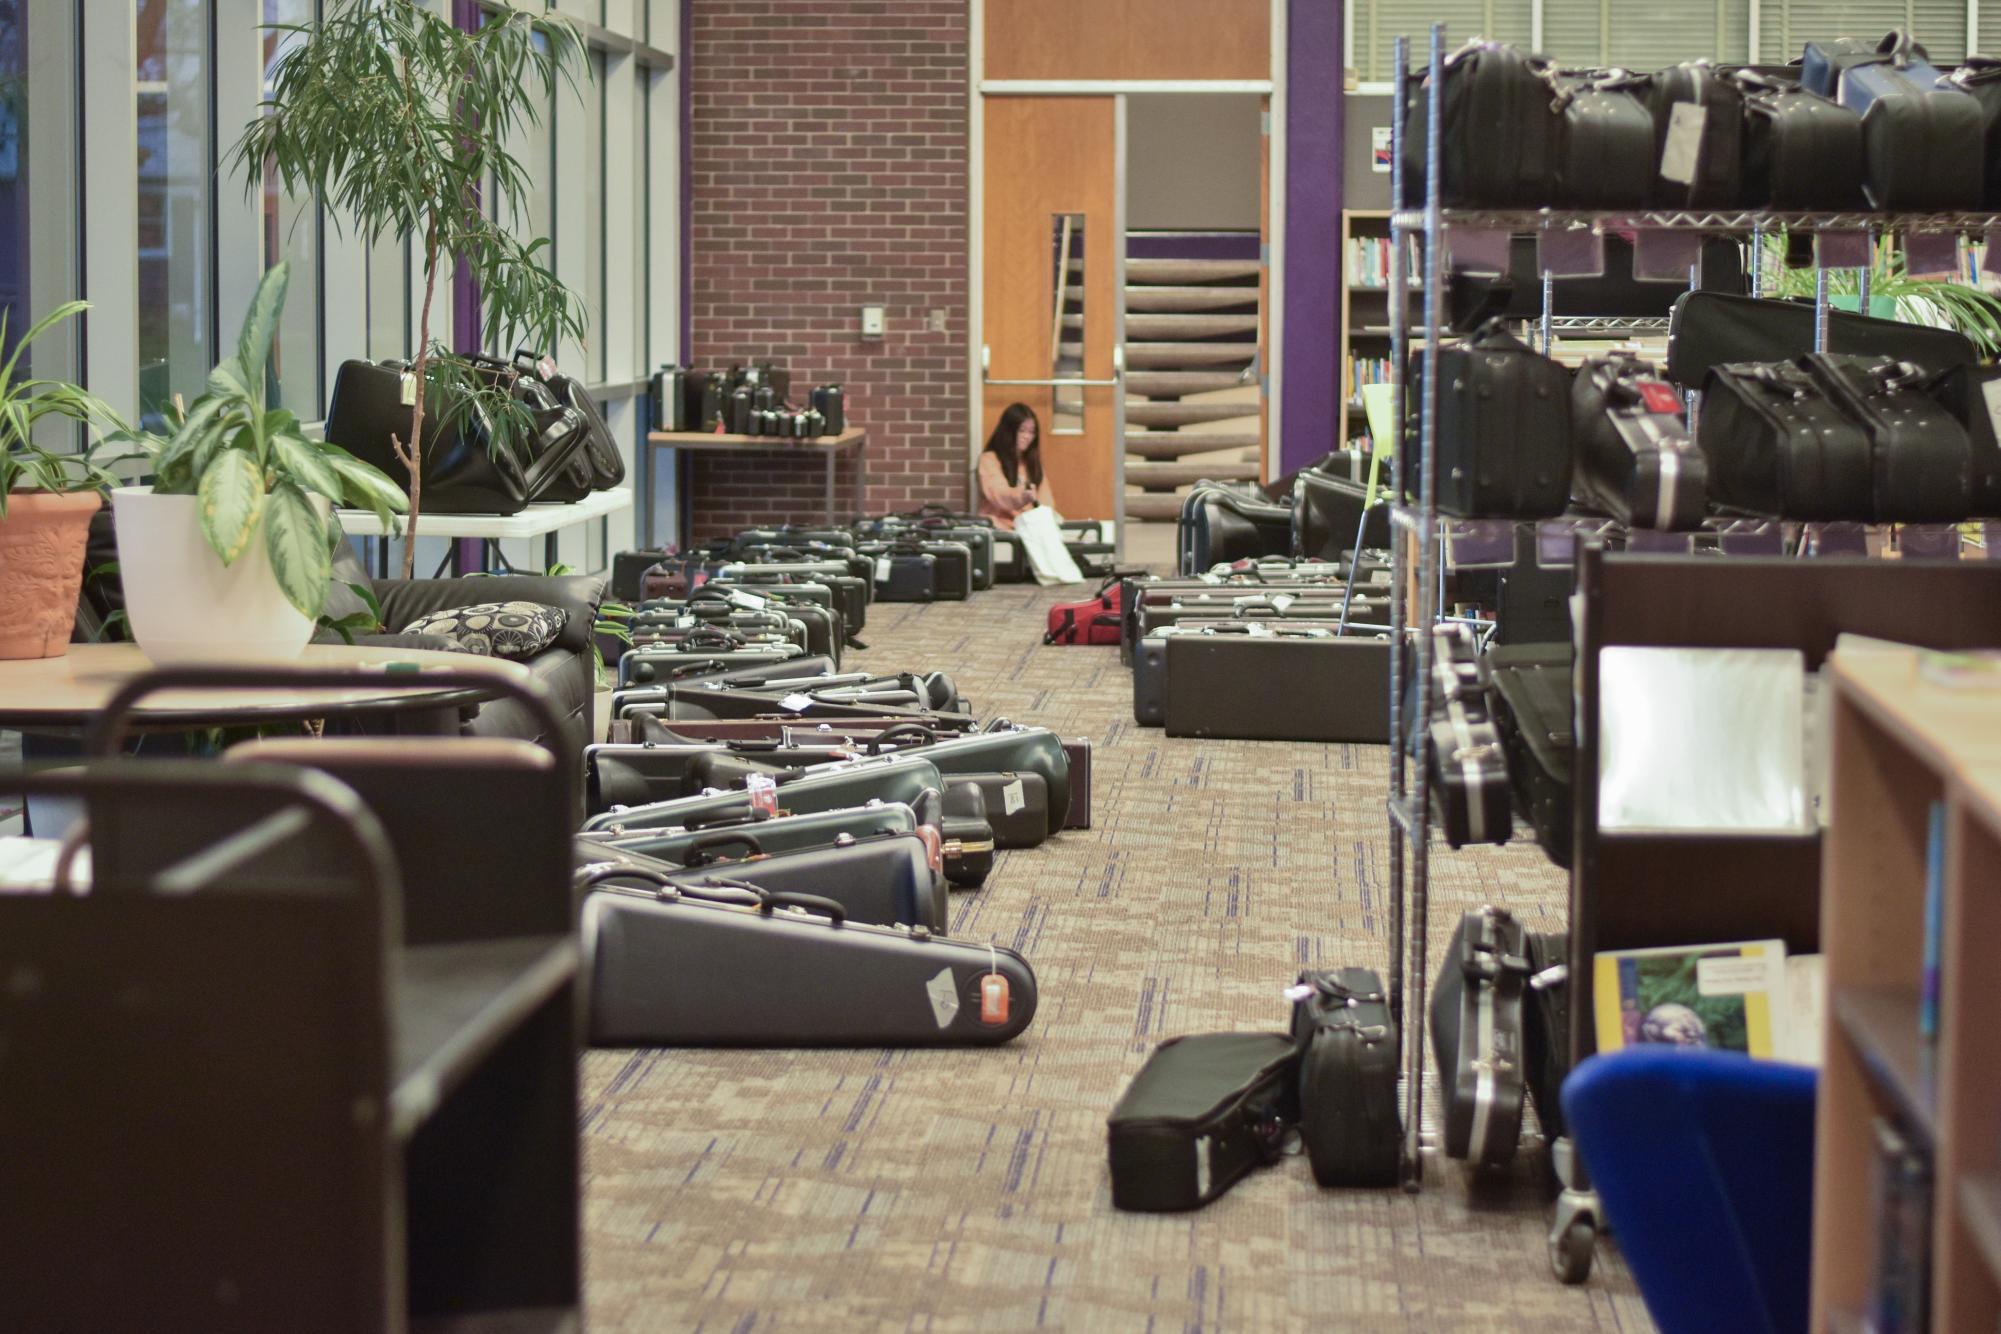 The orchestra and band instruments are stored in the back of the library instead of the unsafe domes.